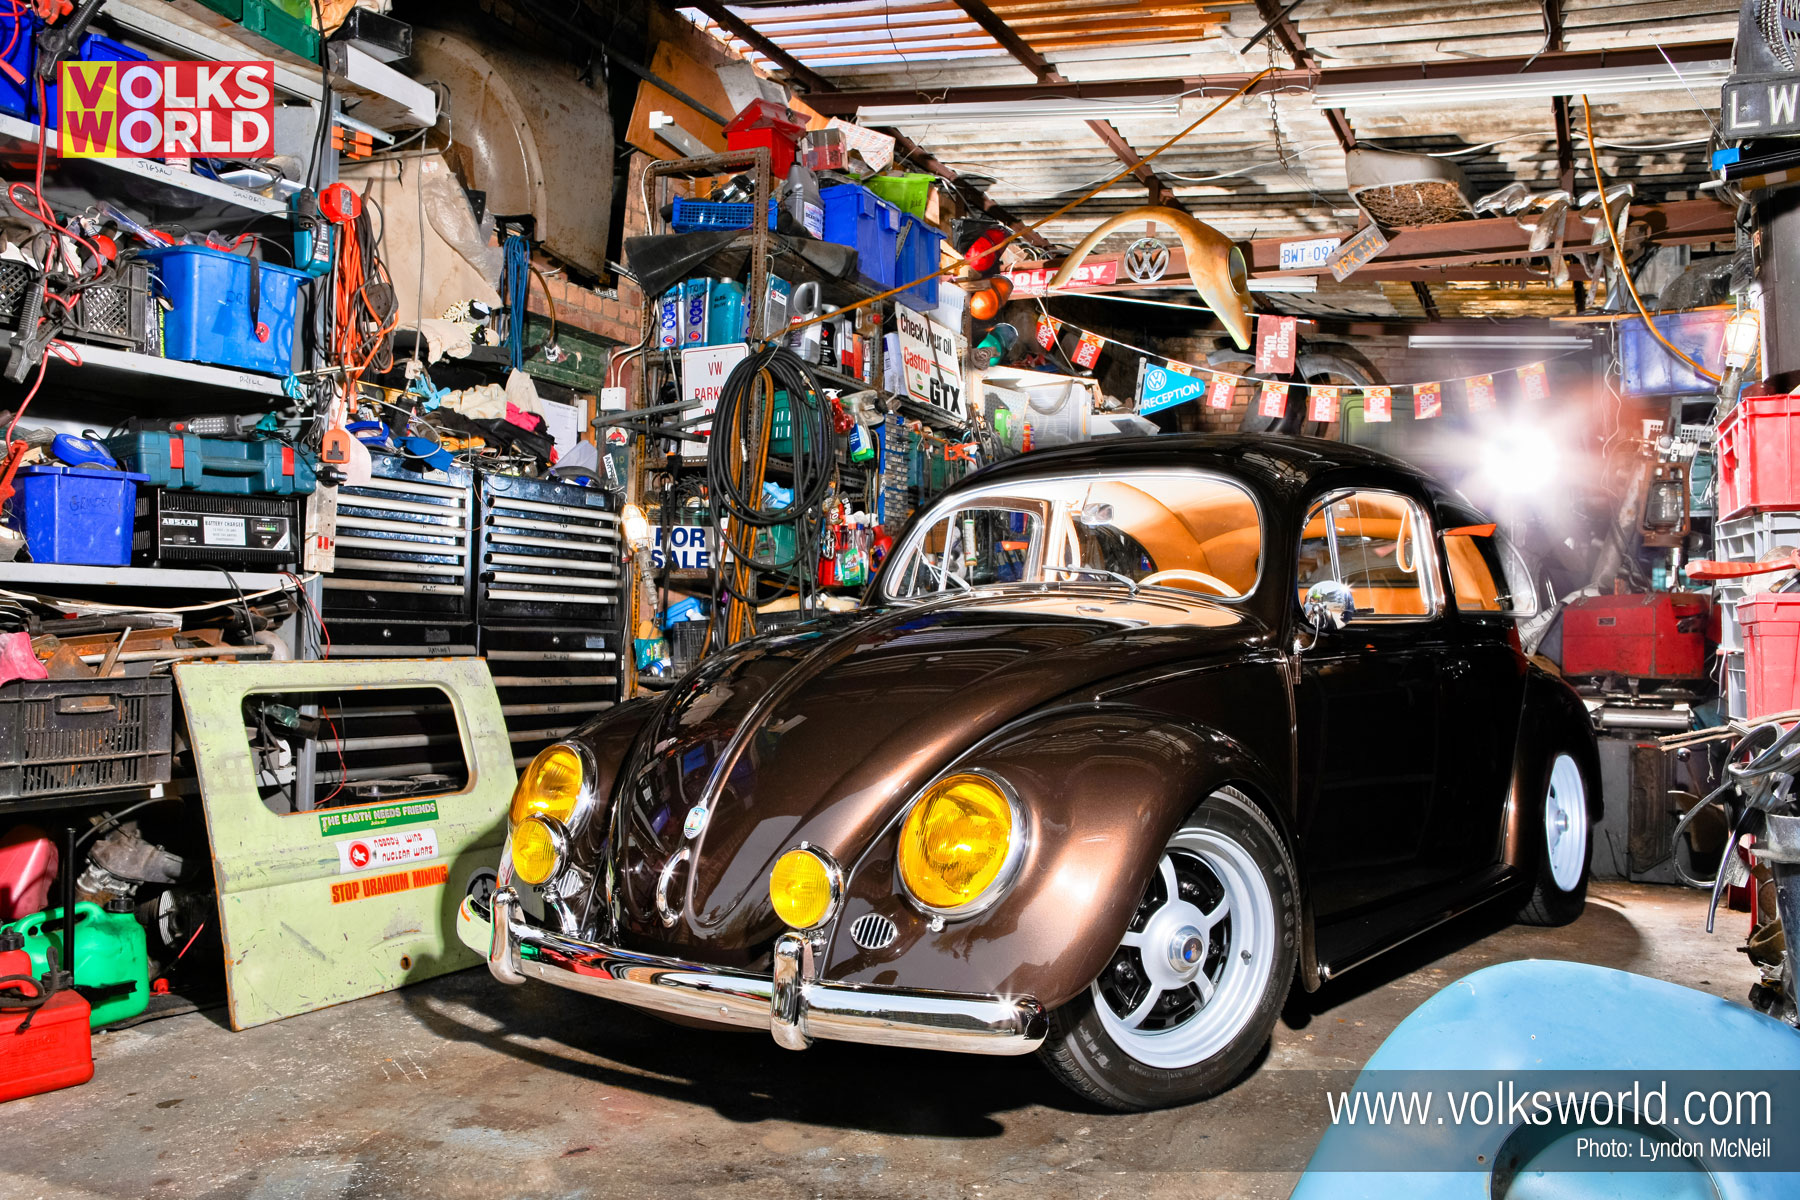 Like Volksworld Subscribe To The Magazine For More Great Features